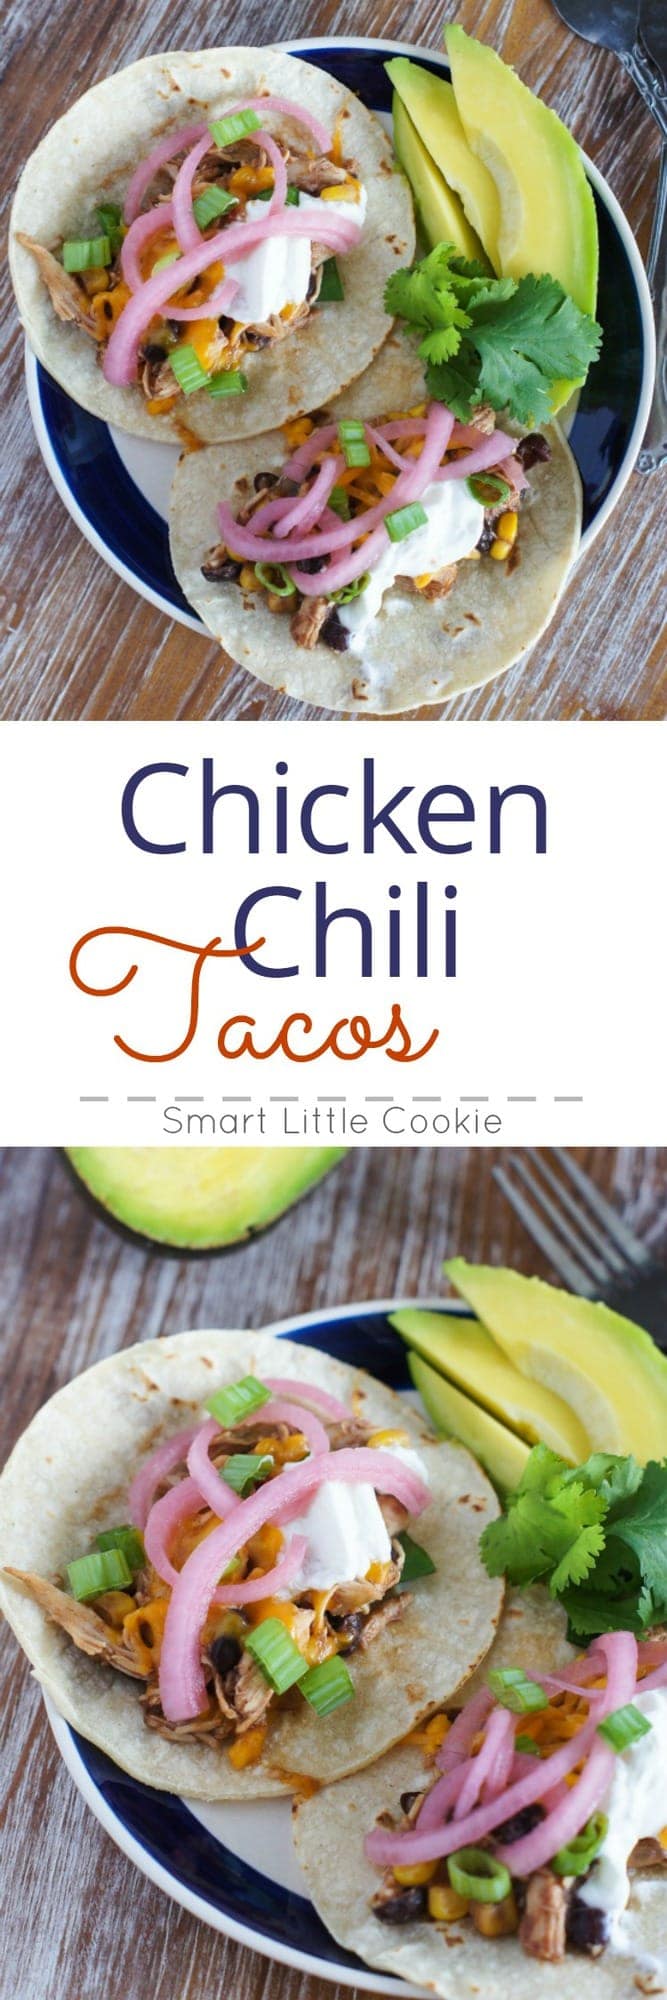 Pinterest graphic. Chicken chili tacos with text overlay.